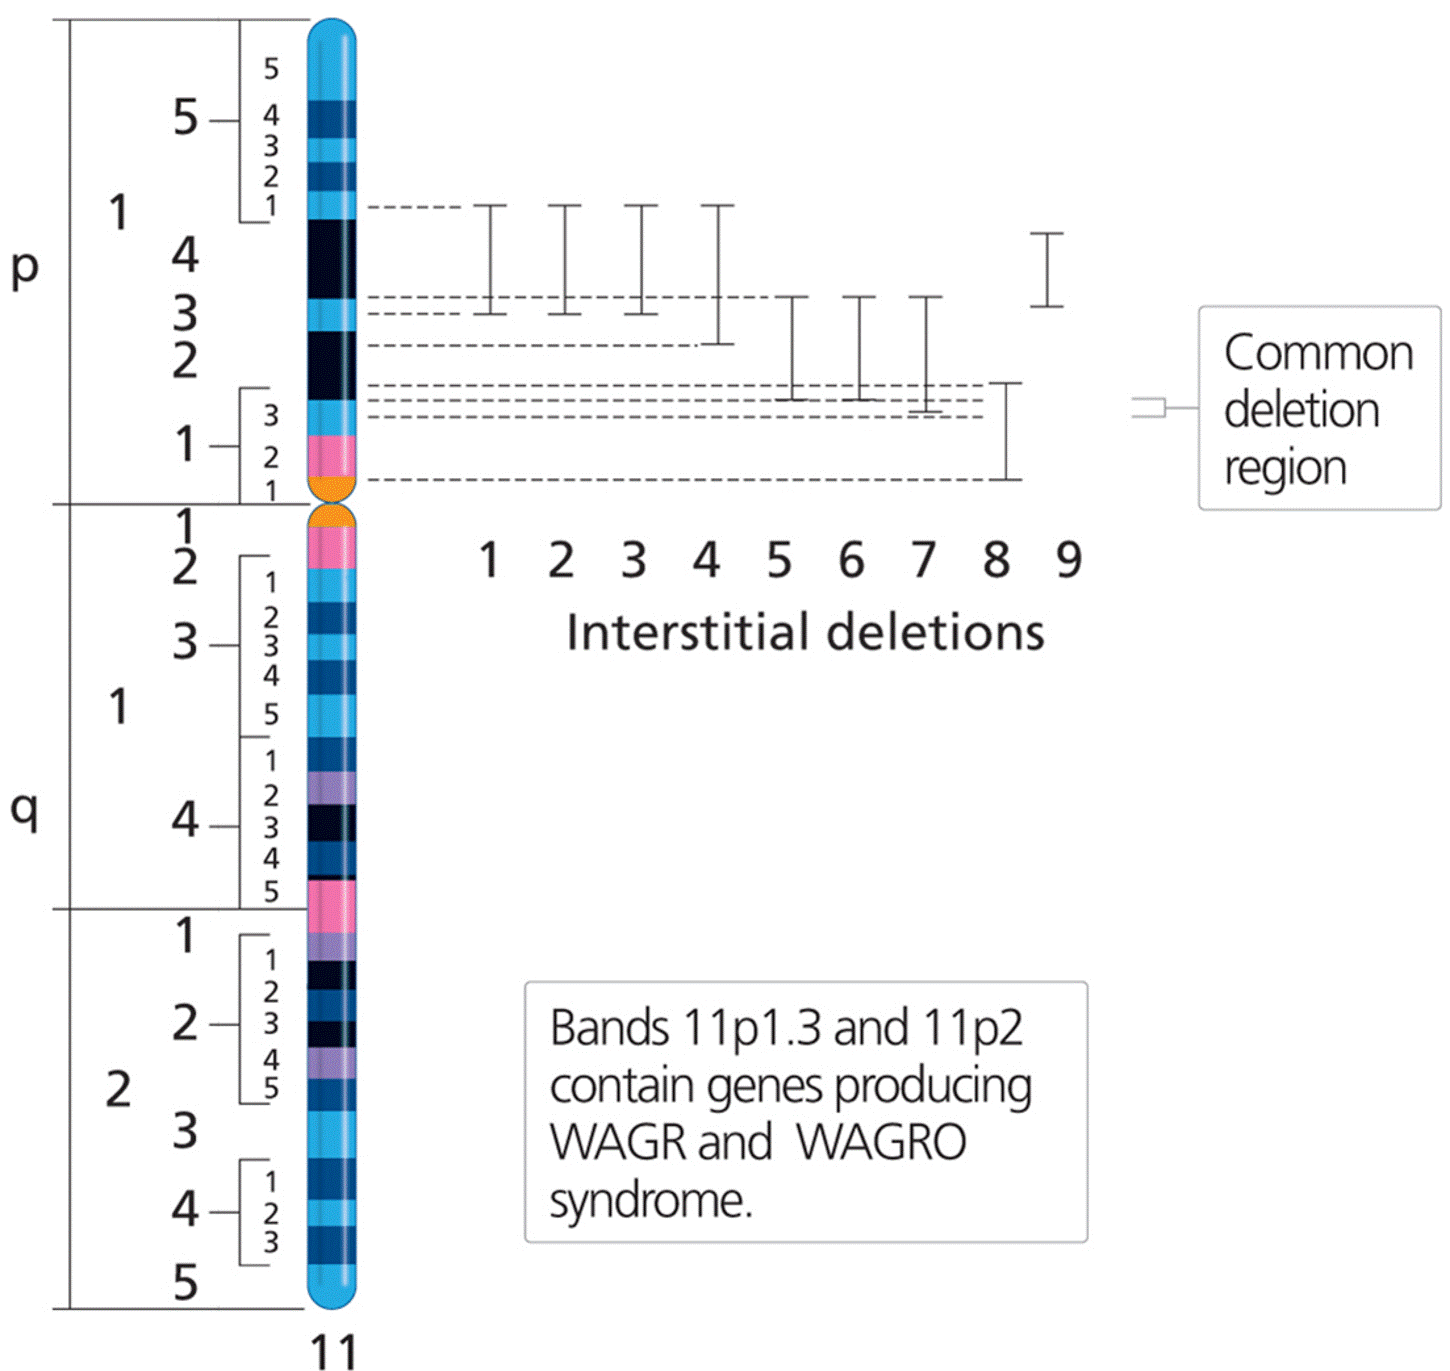 Interstitial deletions of chromosome 11 in WAGR and WAGRO syndromes